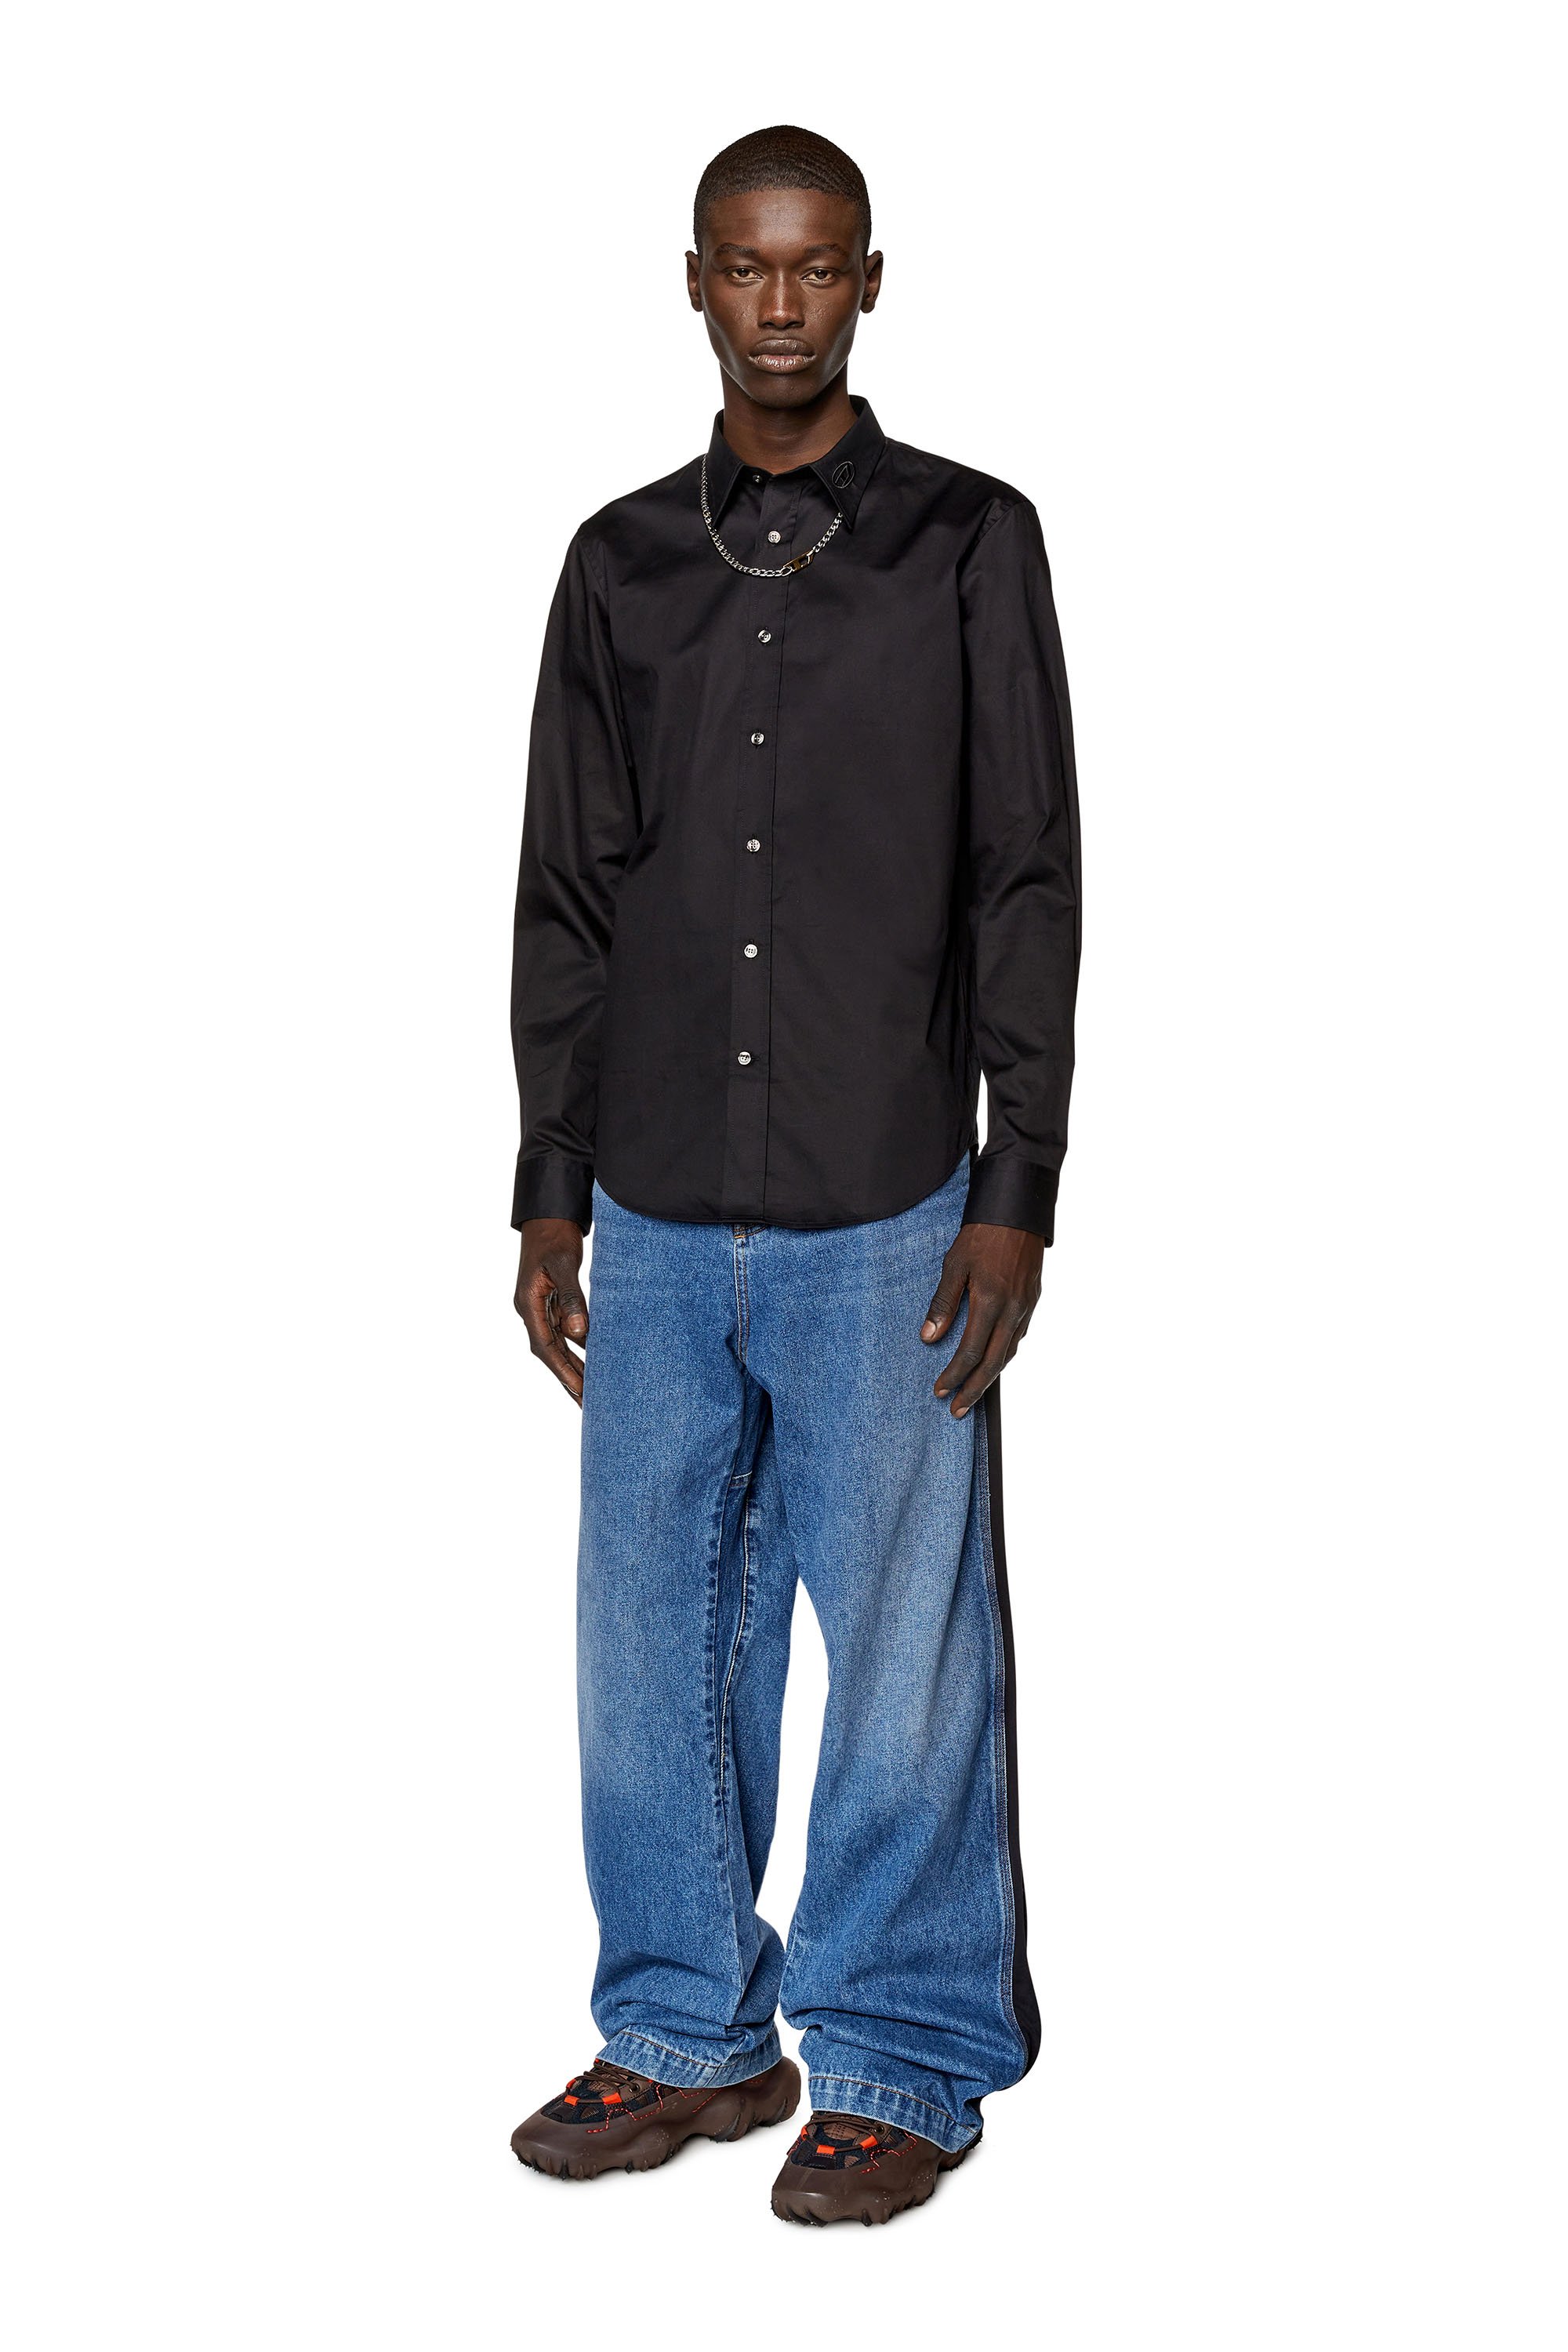 Diesel - S-BENNY-CL, Man Micro-twill shirt with tonal embroidery in Black - Image 2